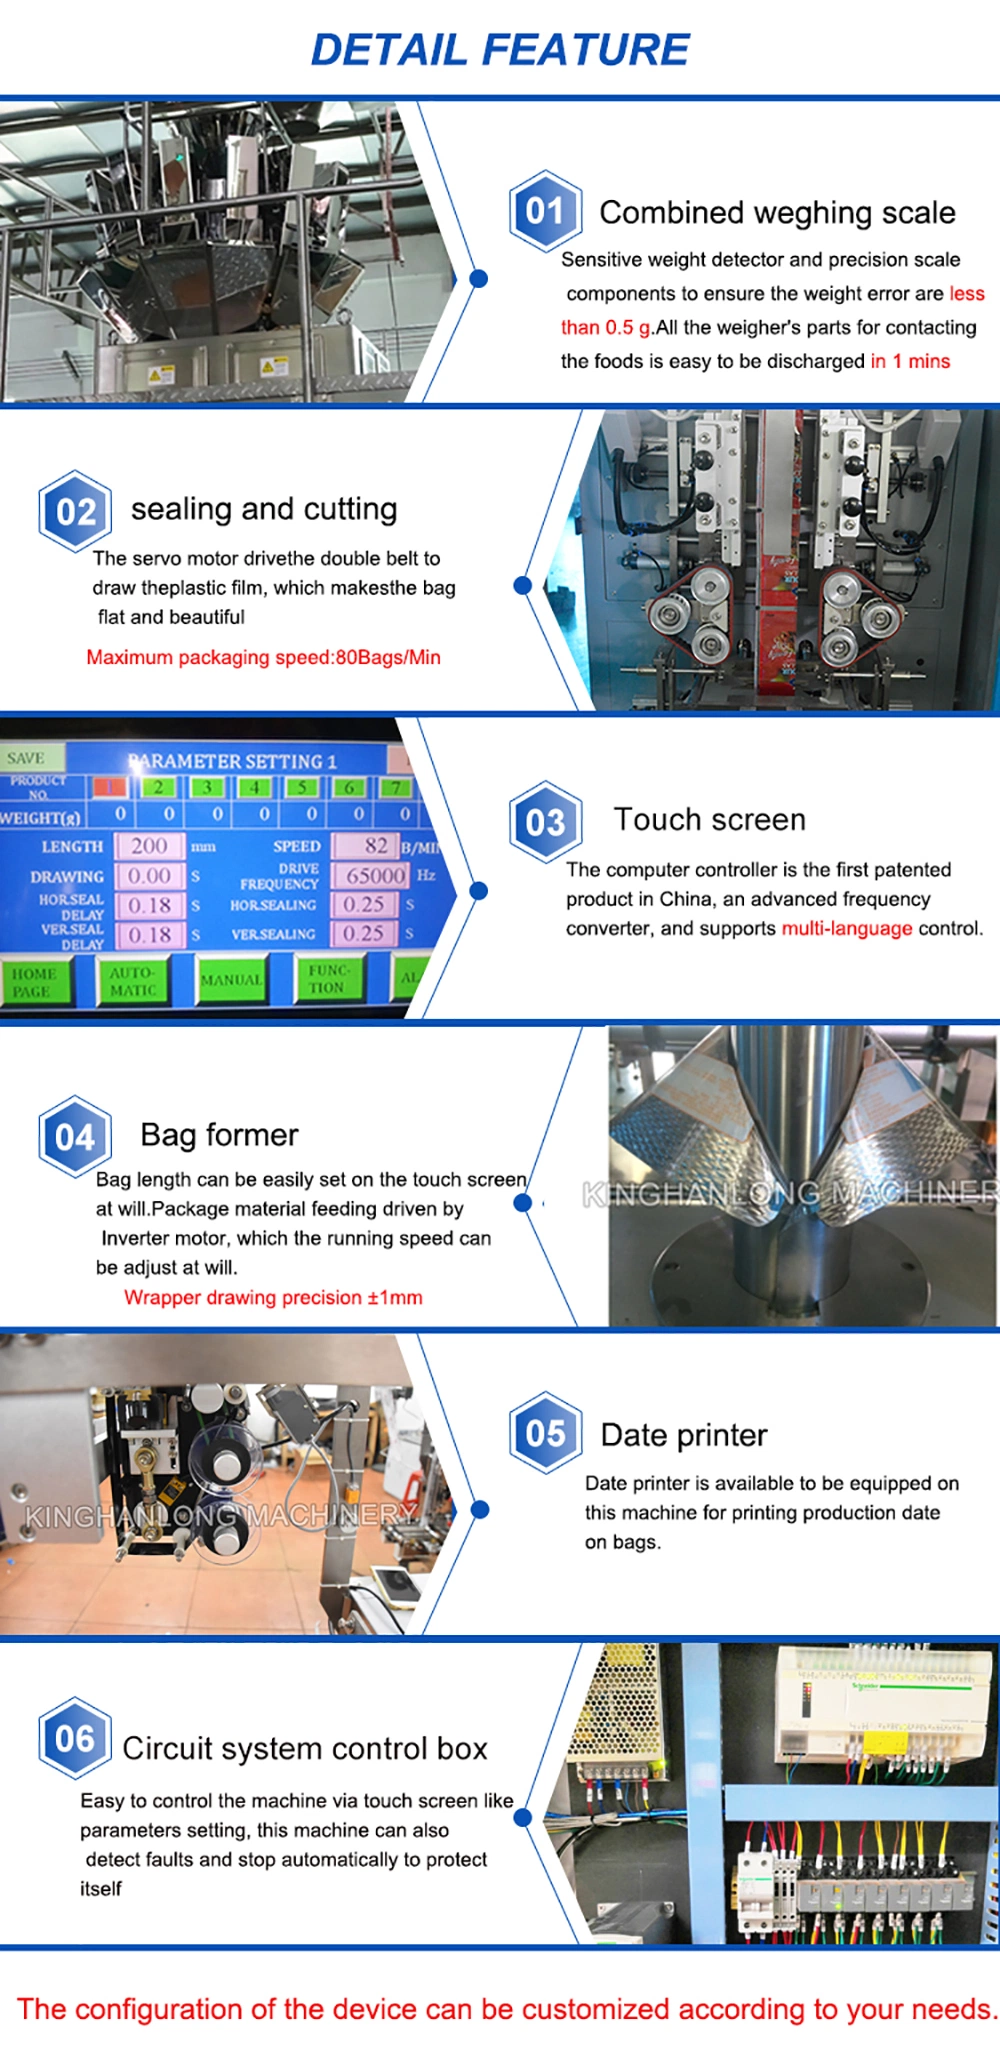 Kitech Automatic Weighing 1kg 2 Kg 5kg Rice Food Pillow Bag Form Fill Seal Wrapping Flow Packaging Packing Filling Sealing Machine